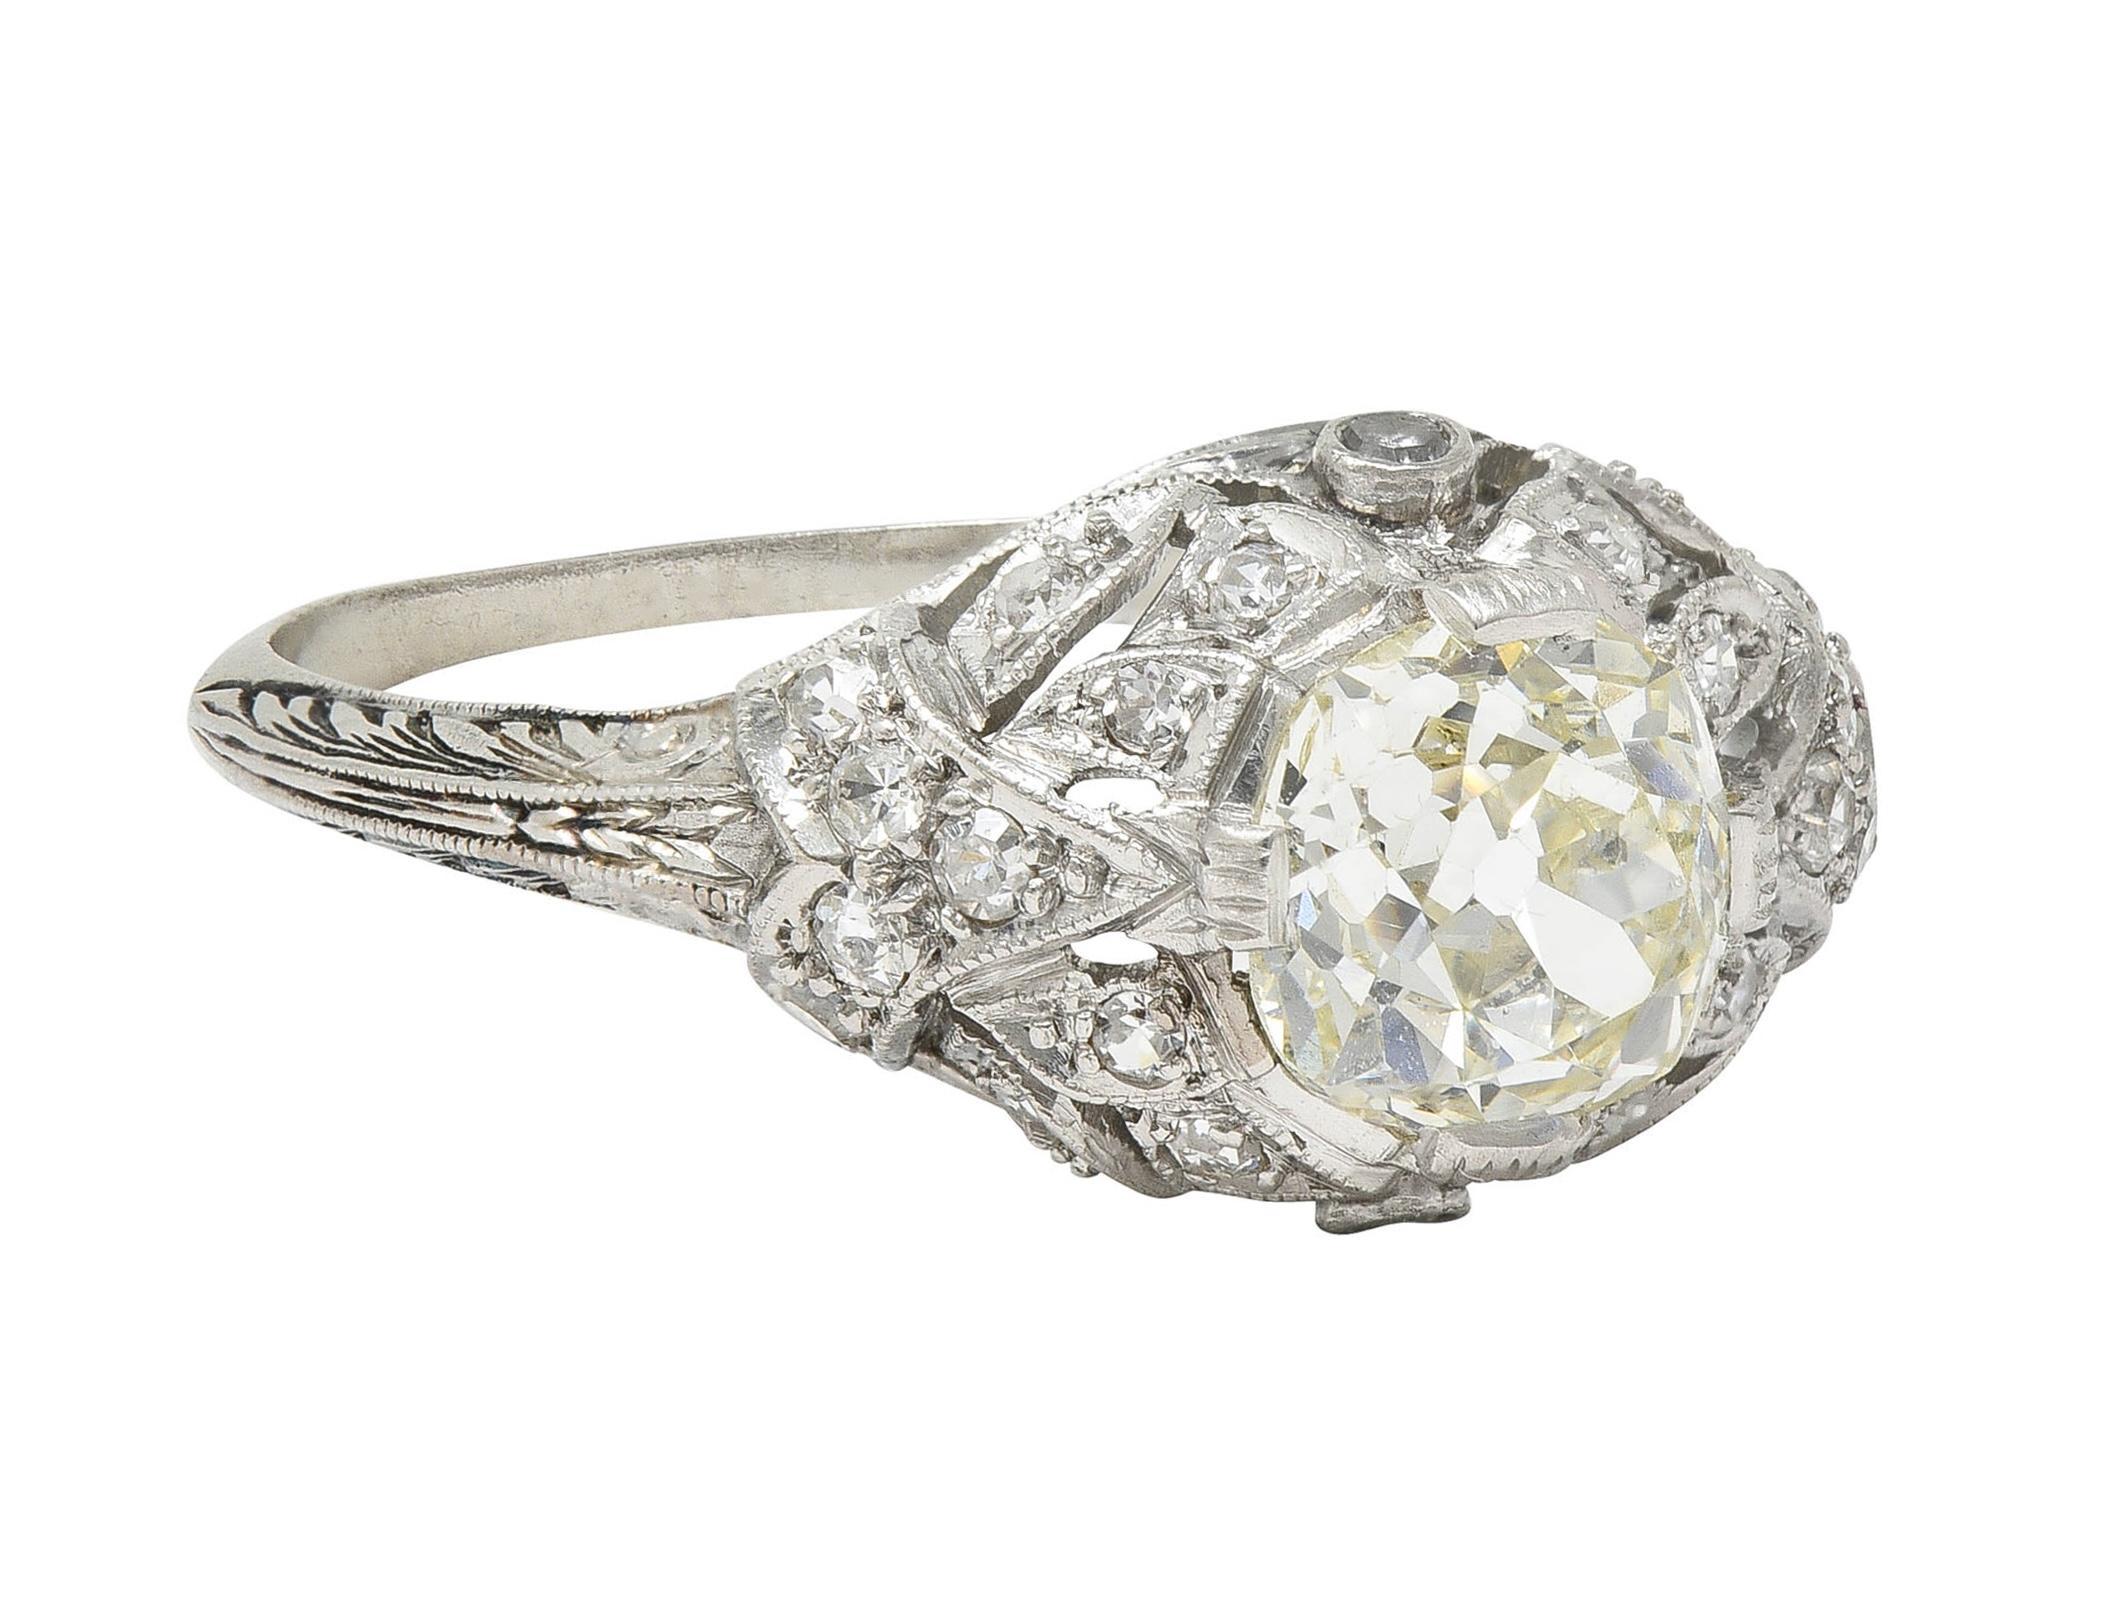 Centering an old mine cut diamond weighing 1.40 carats - M color with SI1 clarity
Set with engraved wide prongs with a pierced foliate motif bombé surround
Bead and bezel set with old single cut diamonds throughout 
Weighing approximately 0.36 carat